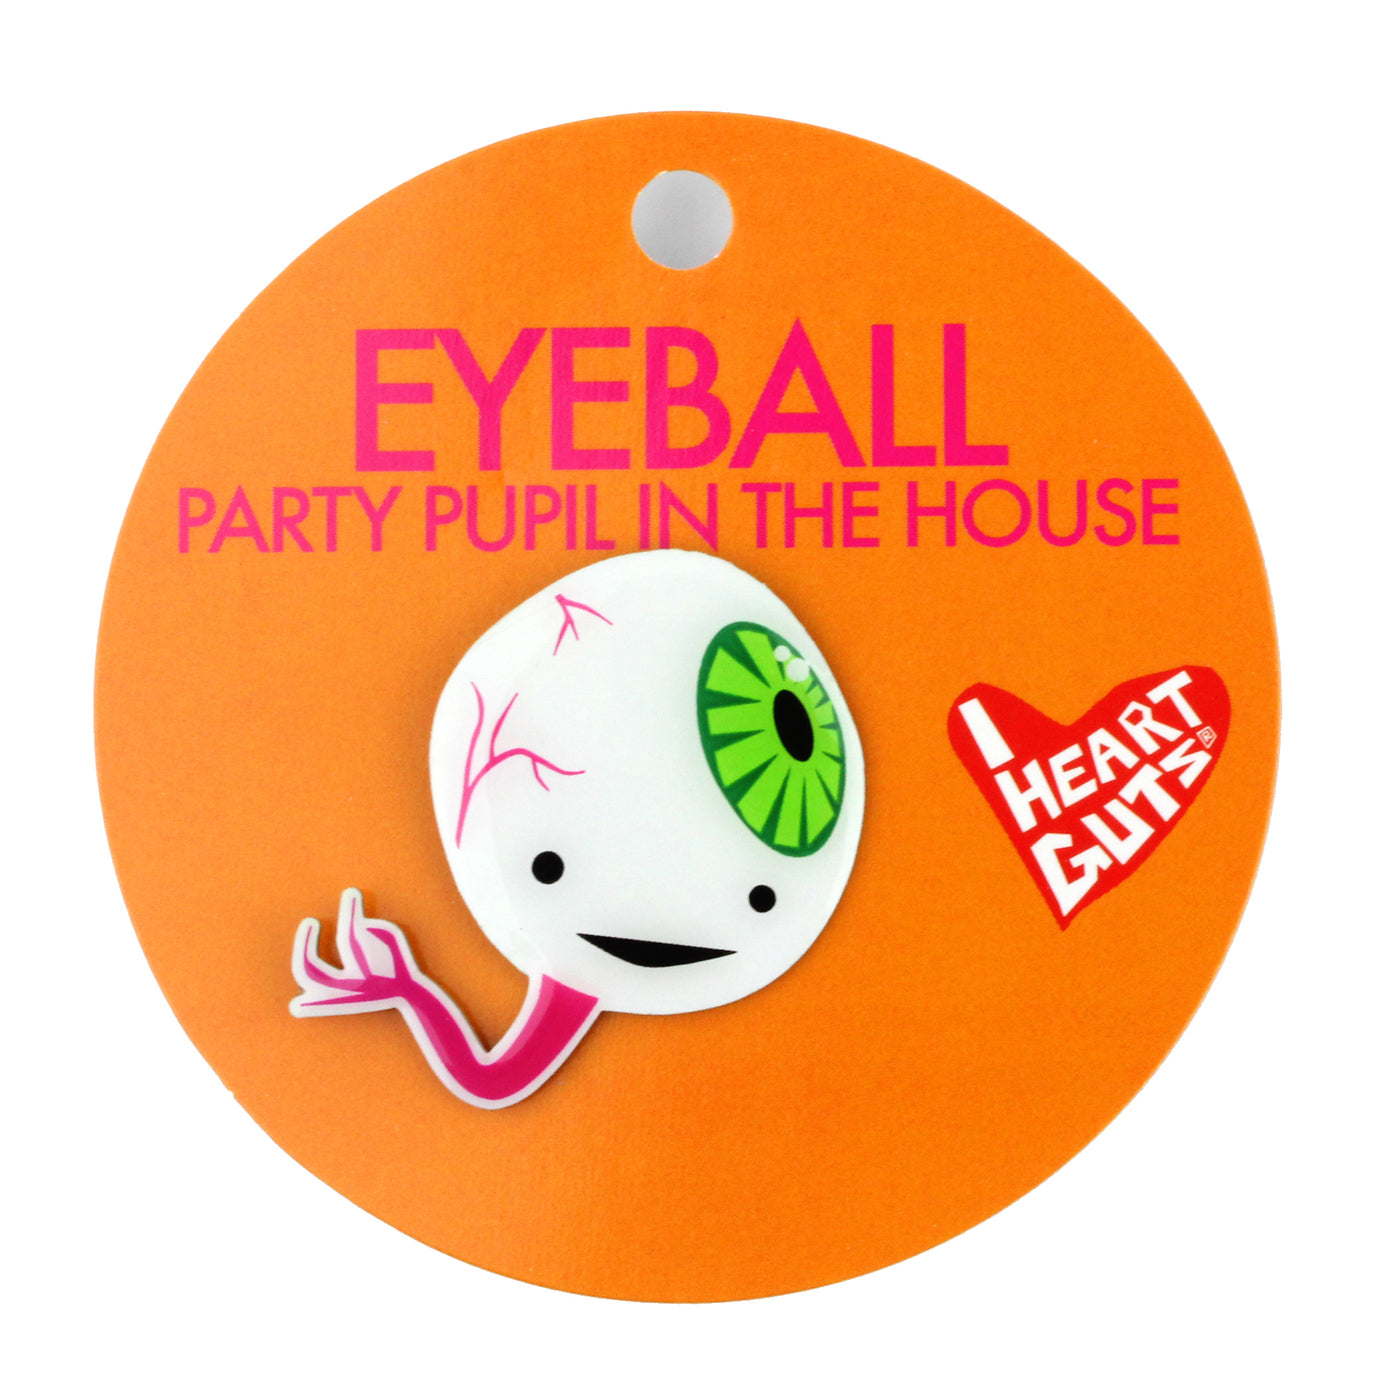 Eyeball Lapel Pin - Party Pupil in the House! - I Heart Guts